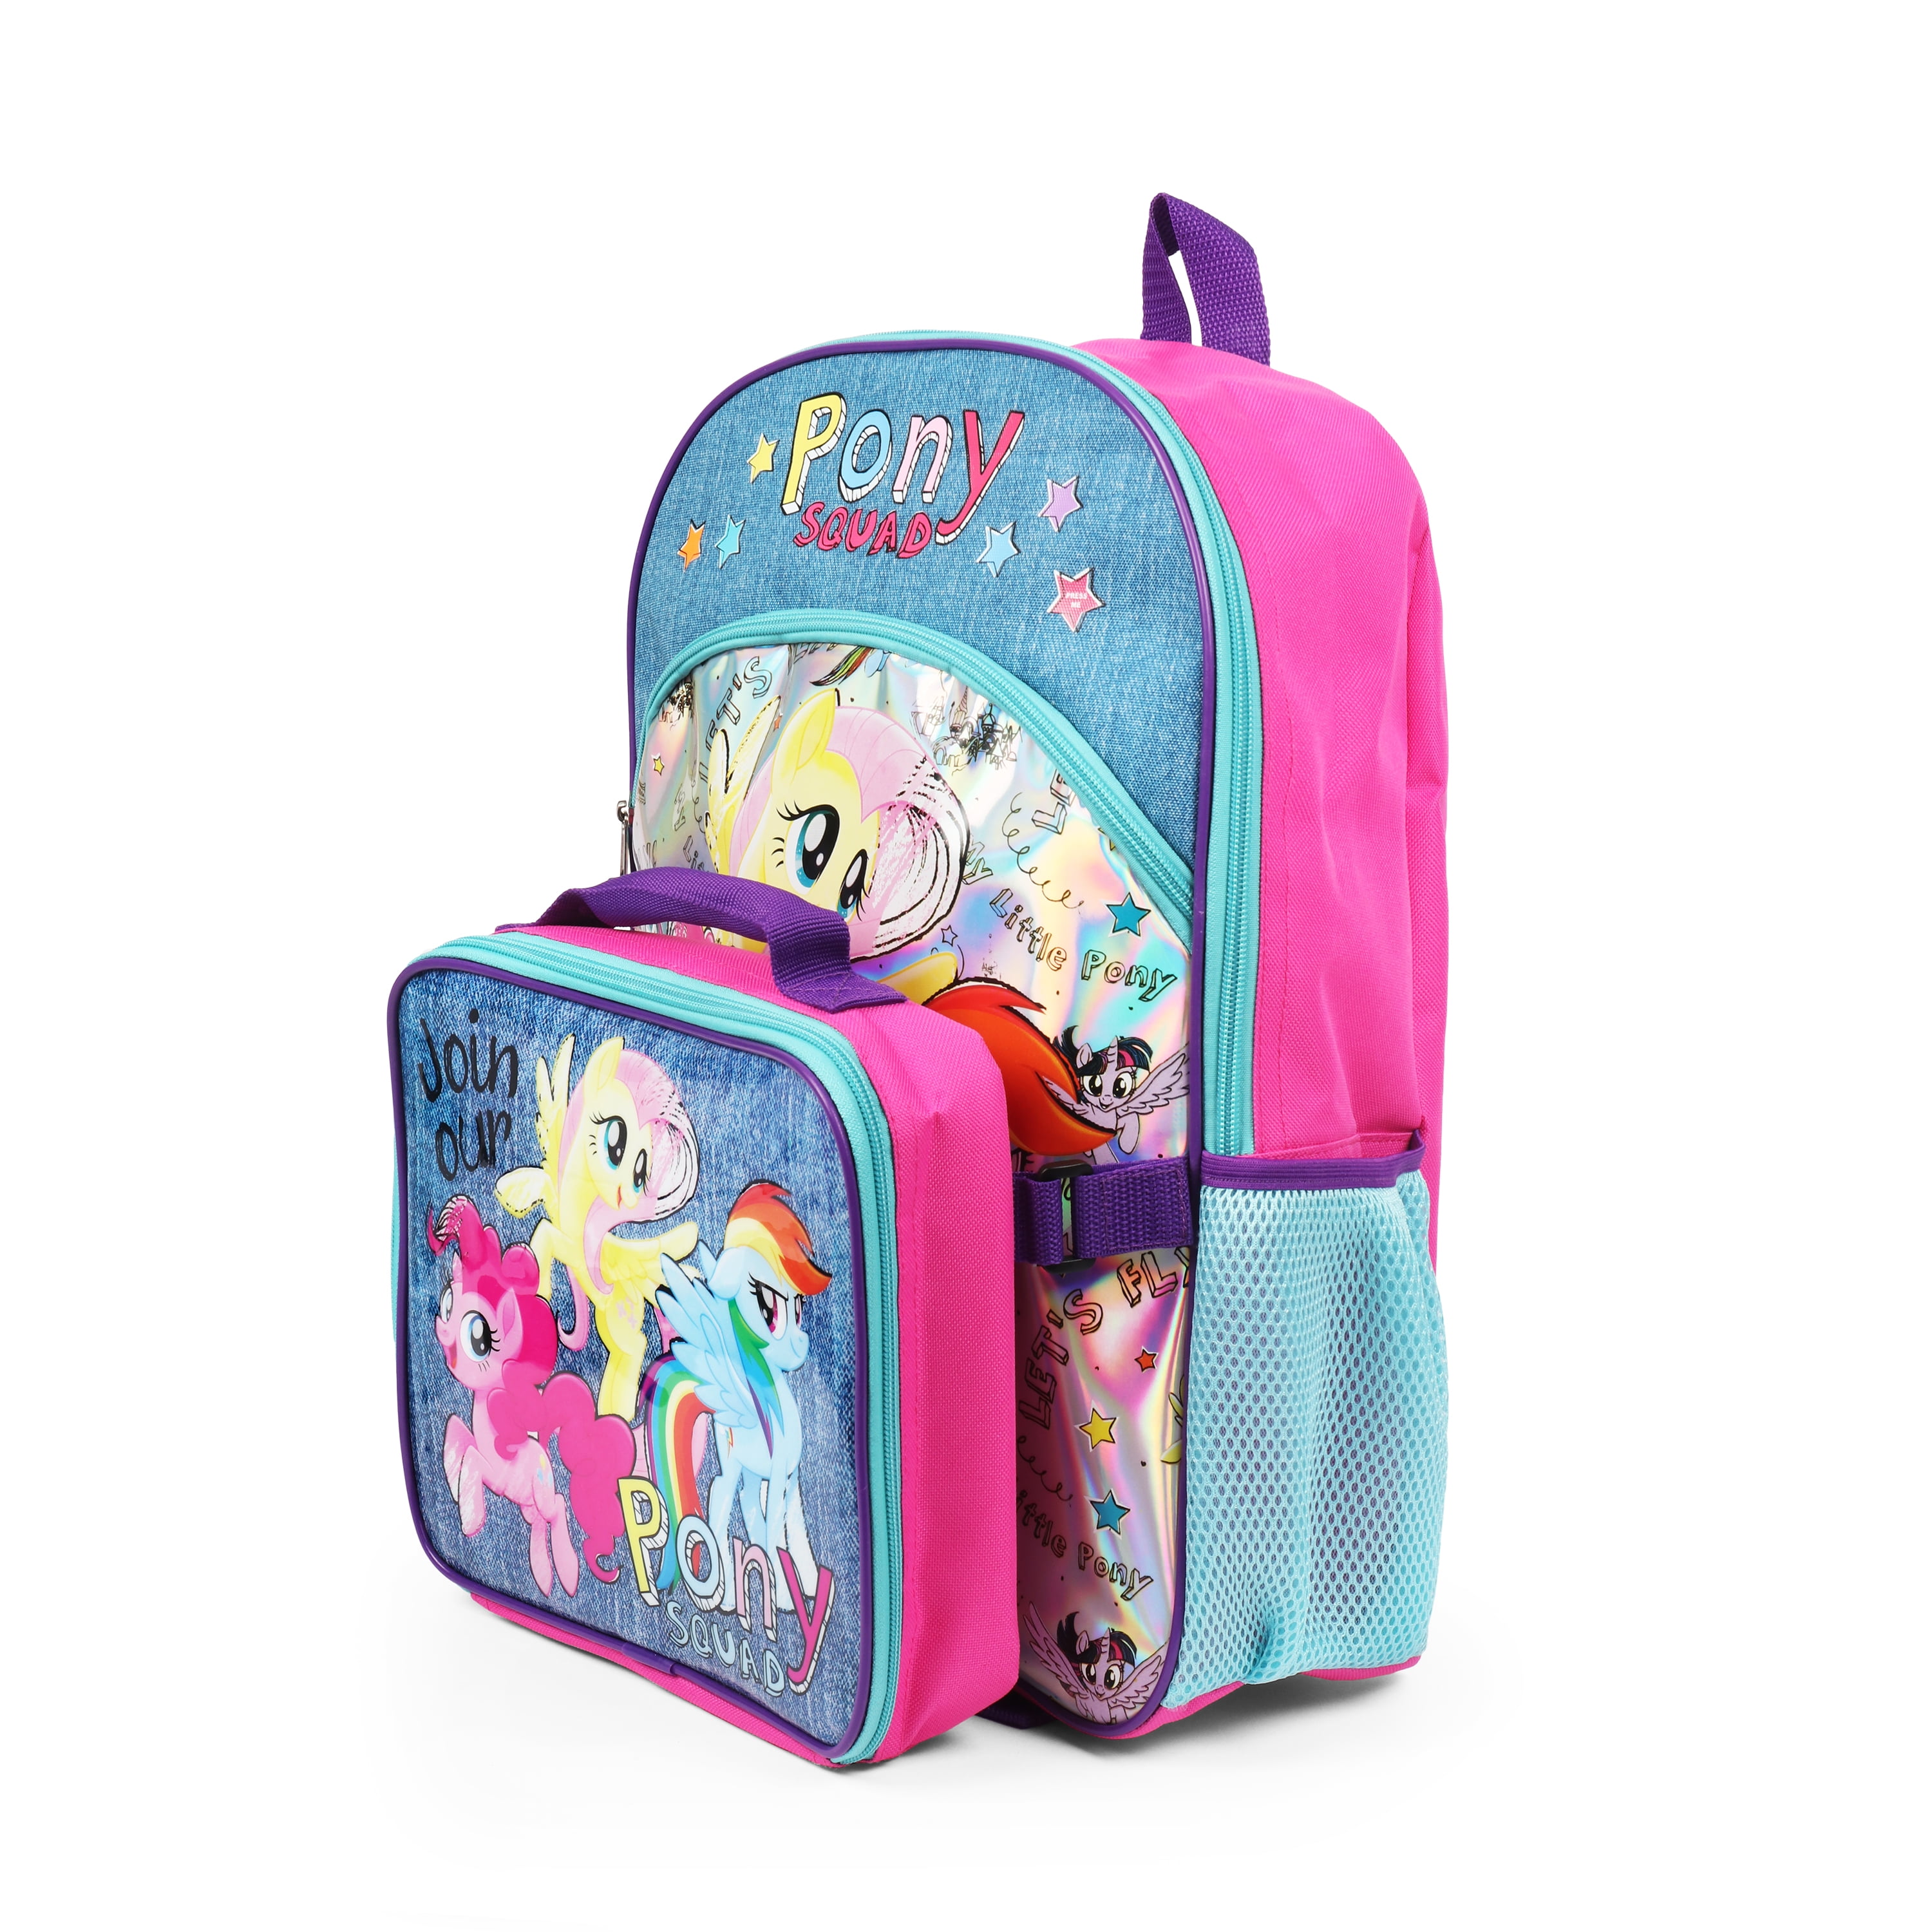 4 Piece Backpack Set MLP Lunch Bag My Little Pony Includes 16 Inch Backpack BPA Free Water Bottle and Cinch Bag